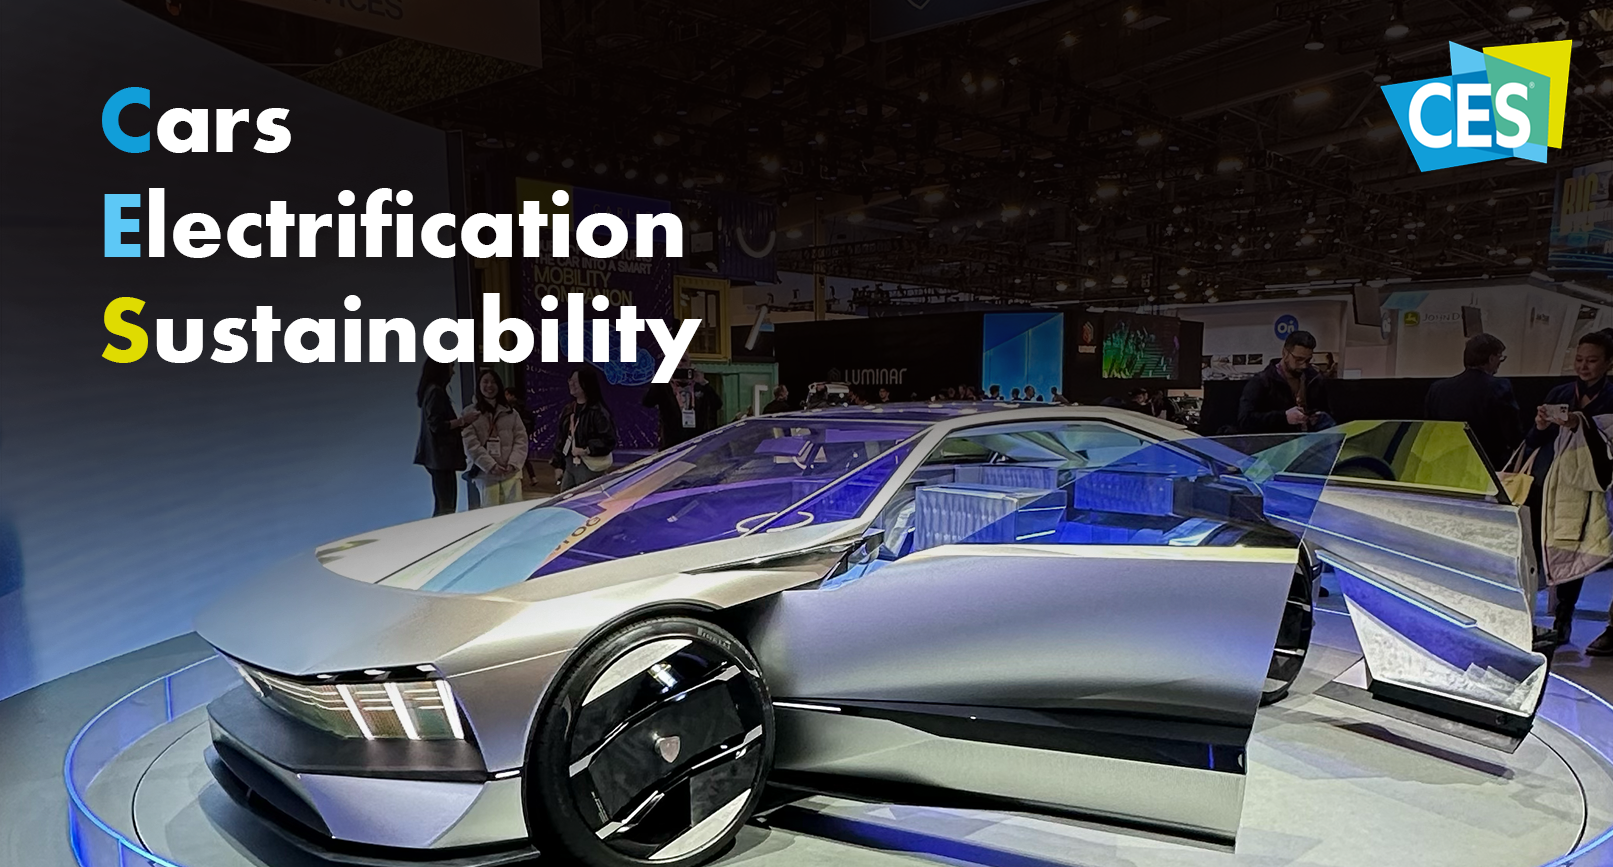 All about Vehicles, Electrification and Sustainability